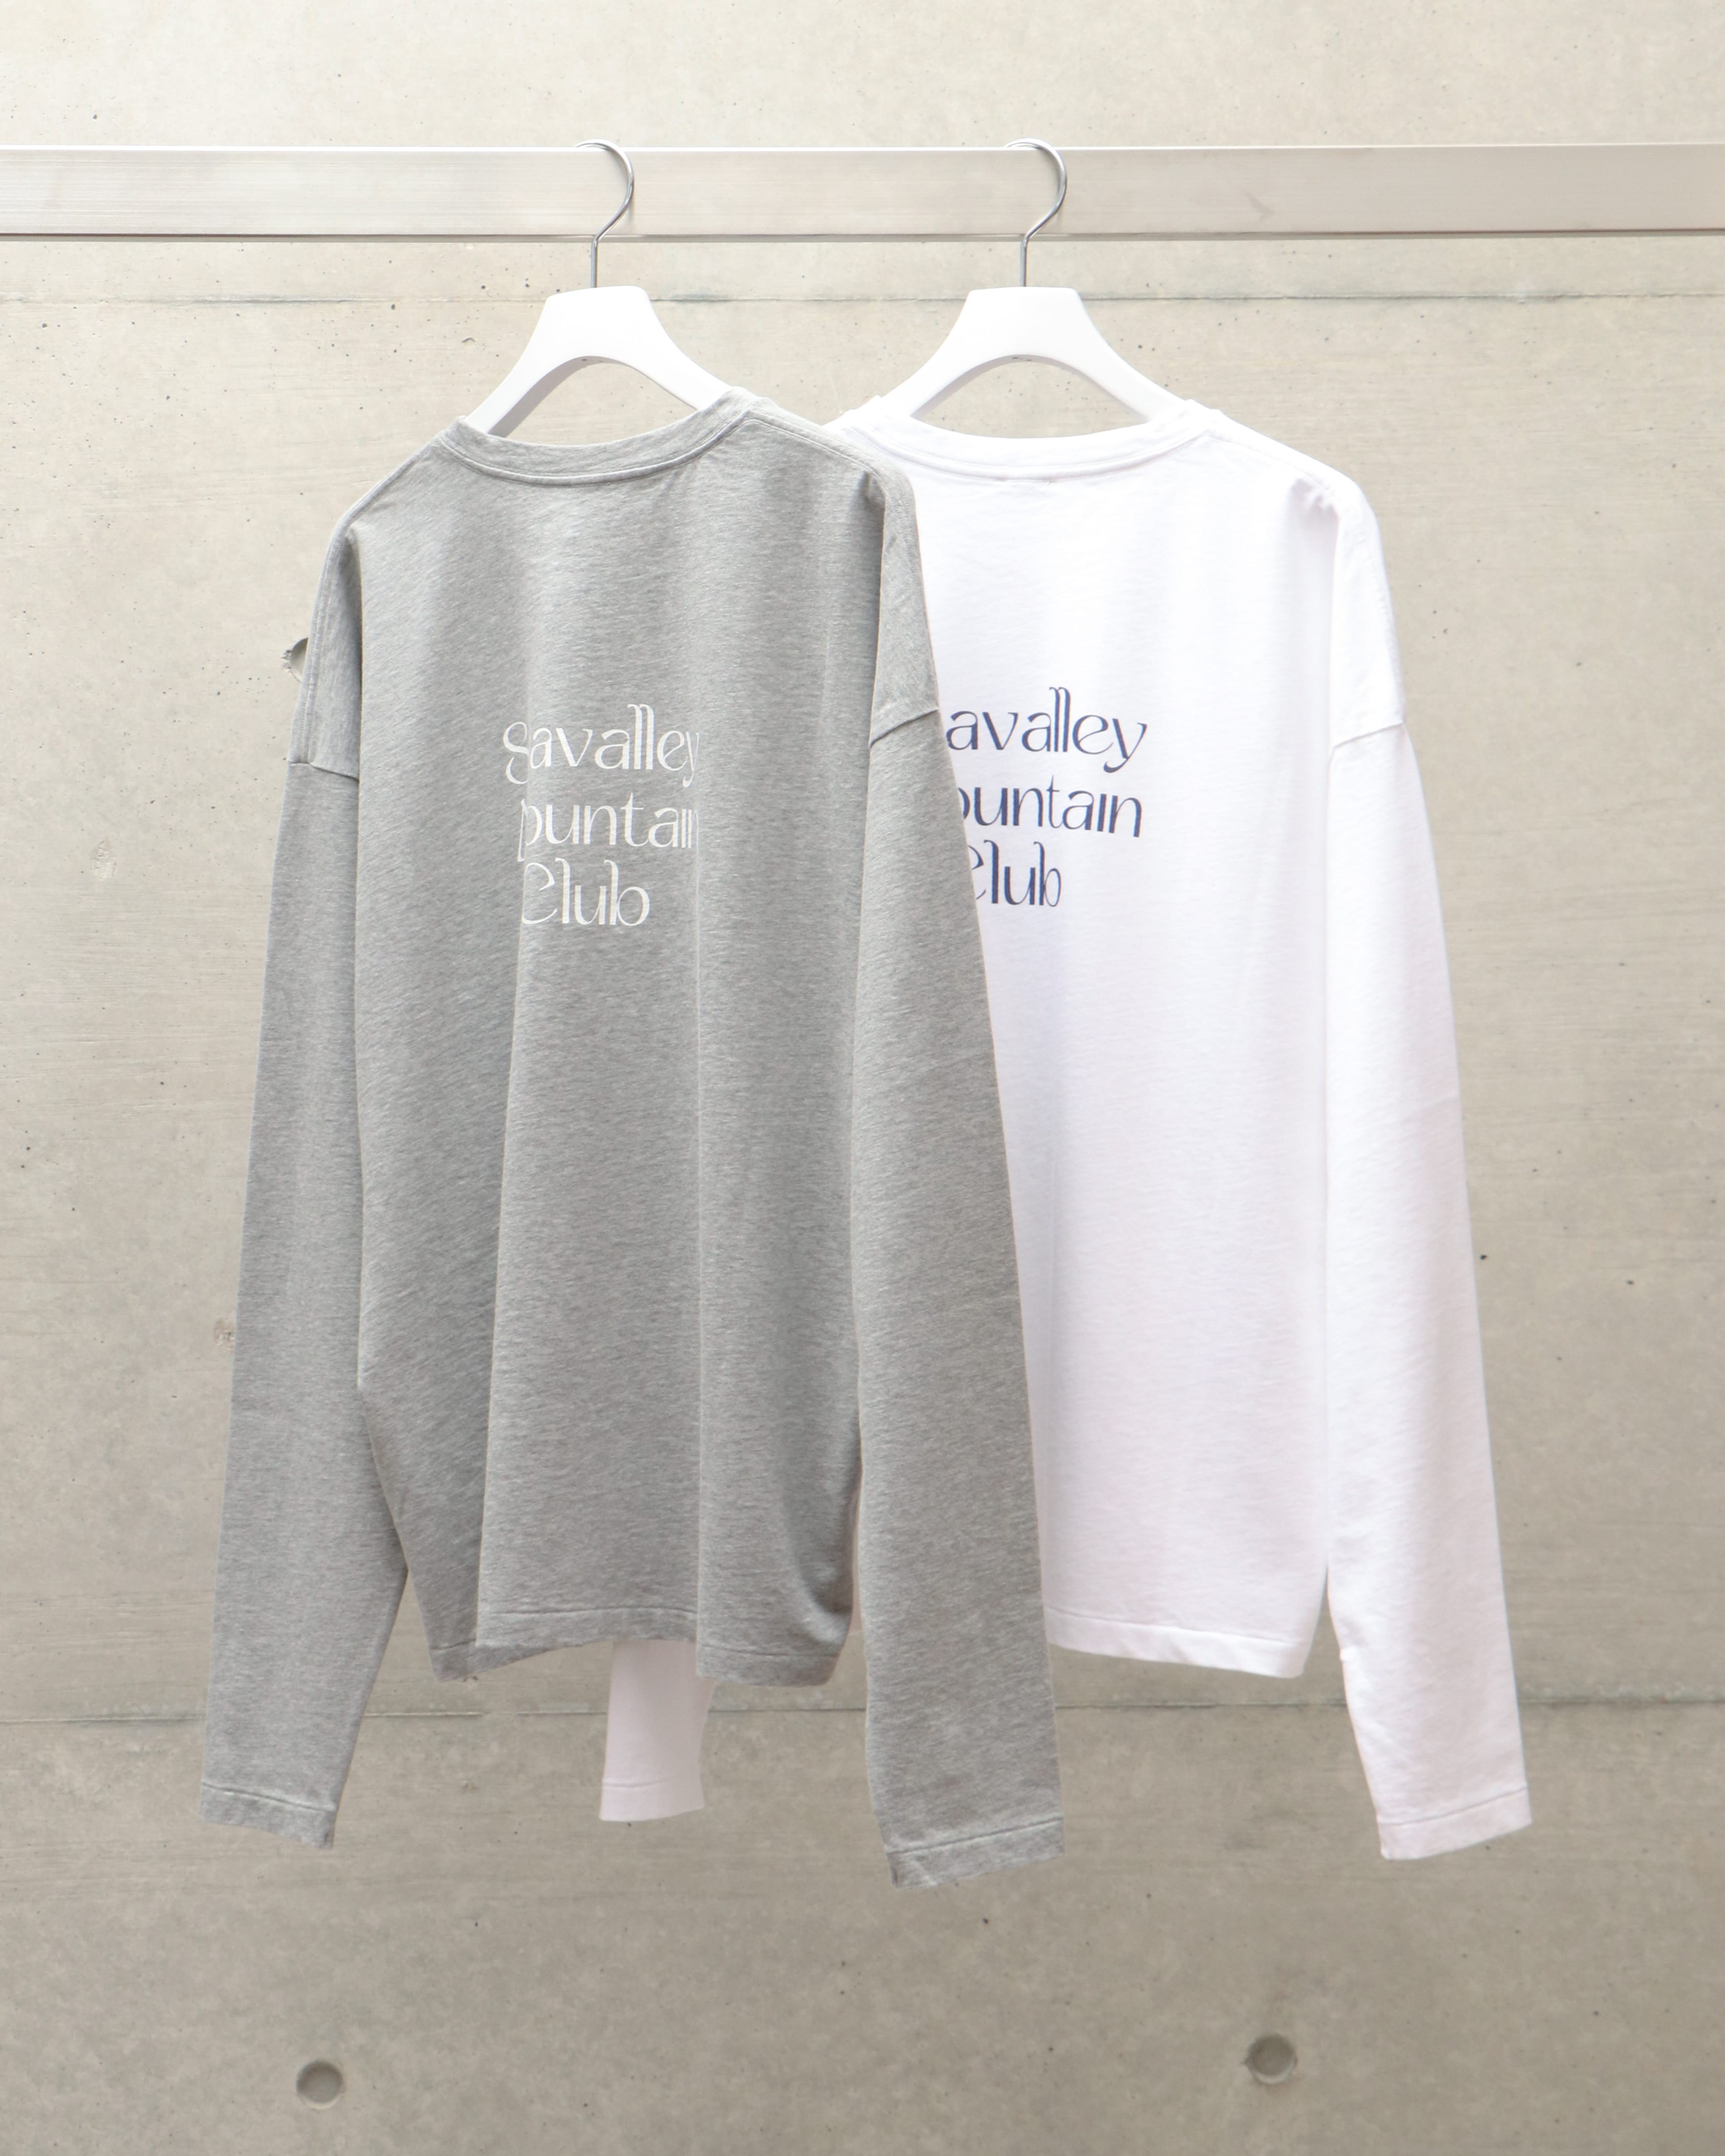 GRAPHIC L/S TEE(Seavalley Mountain Club) – TIME AFTER TIME